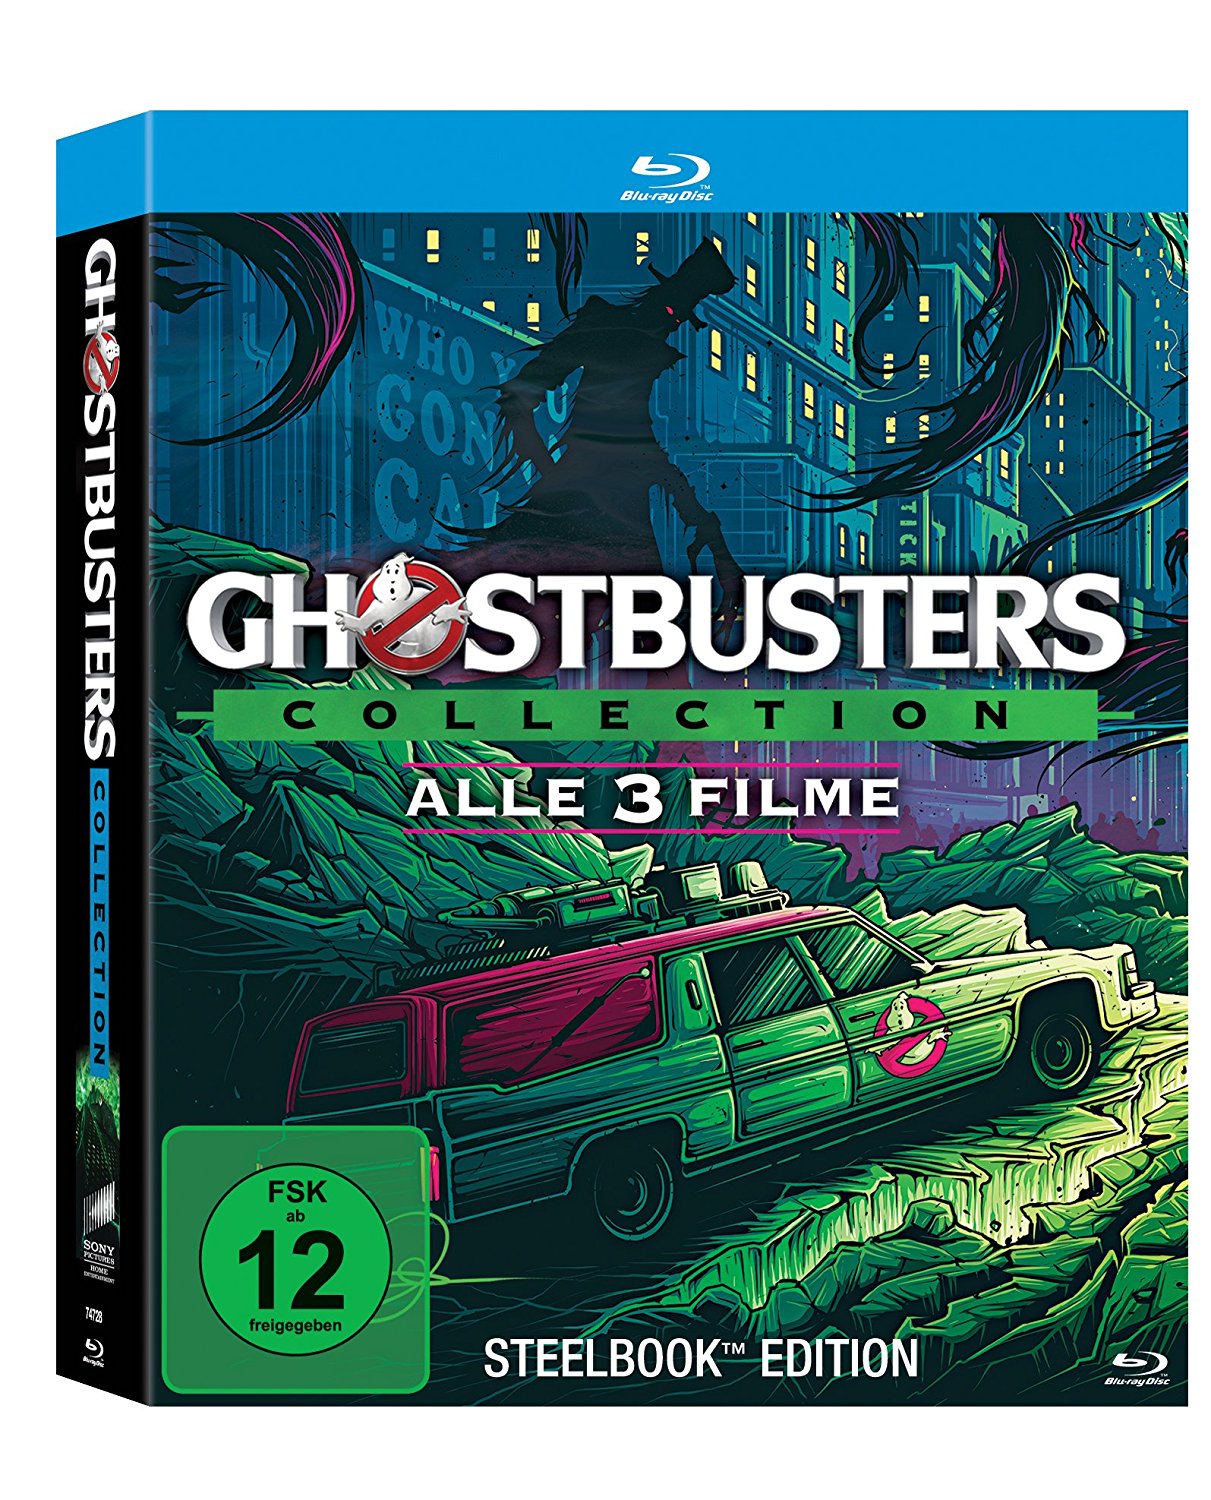 ghostbusters-collection-steelbook-1